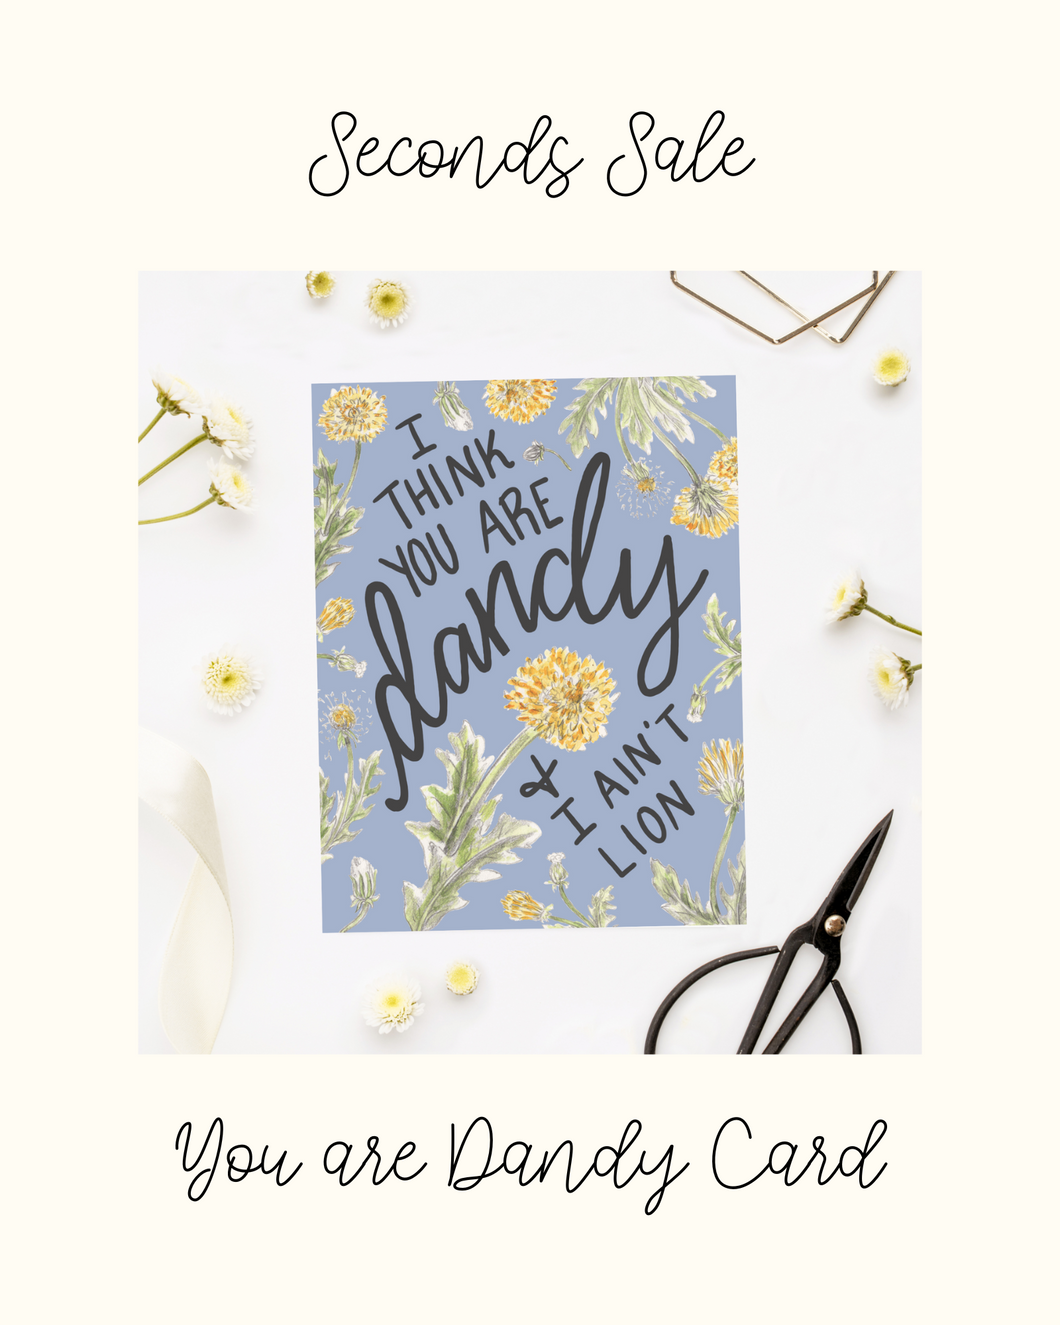 I think you are Dandy Card - Seconds Sale